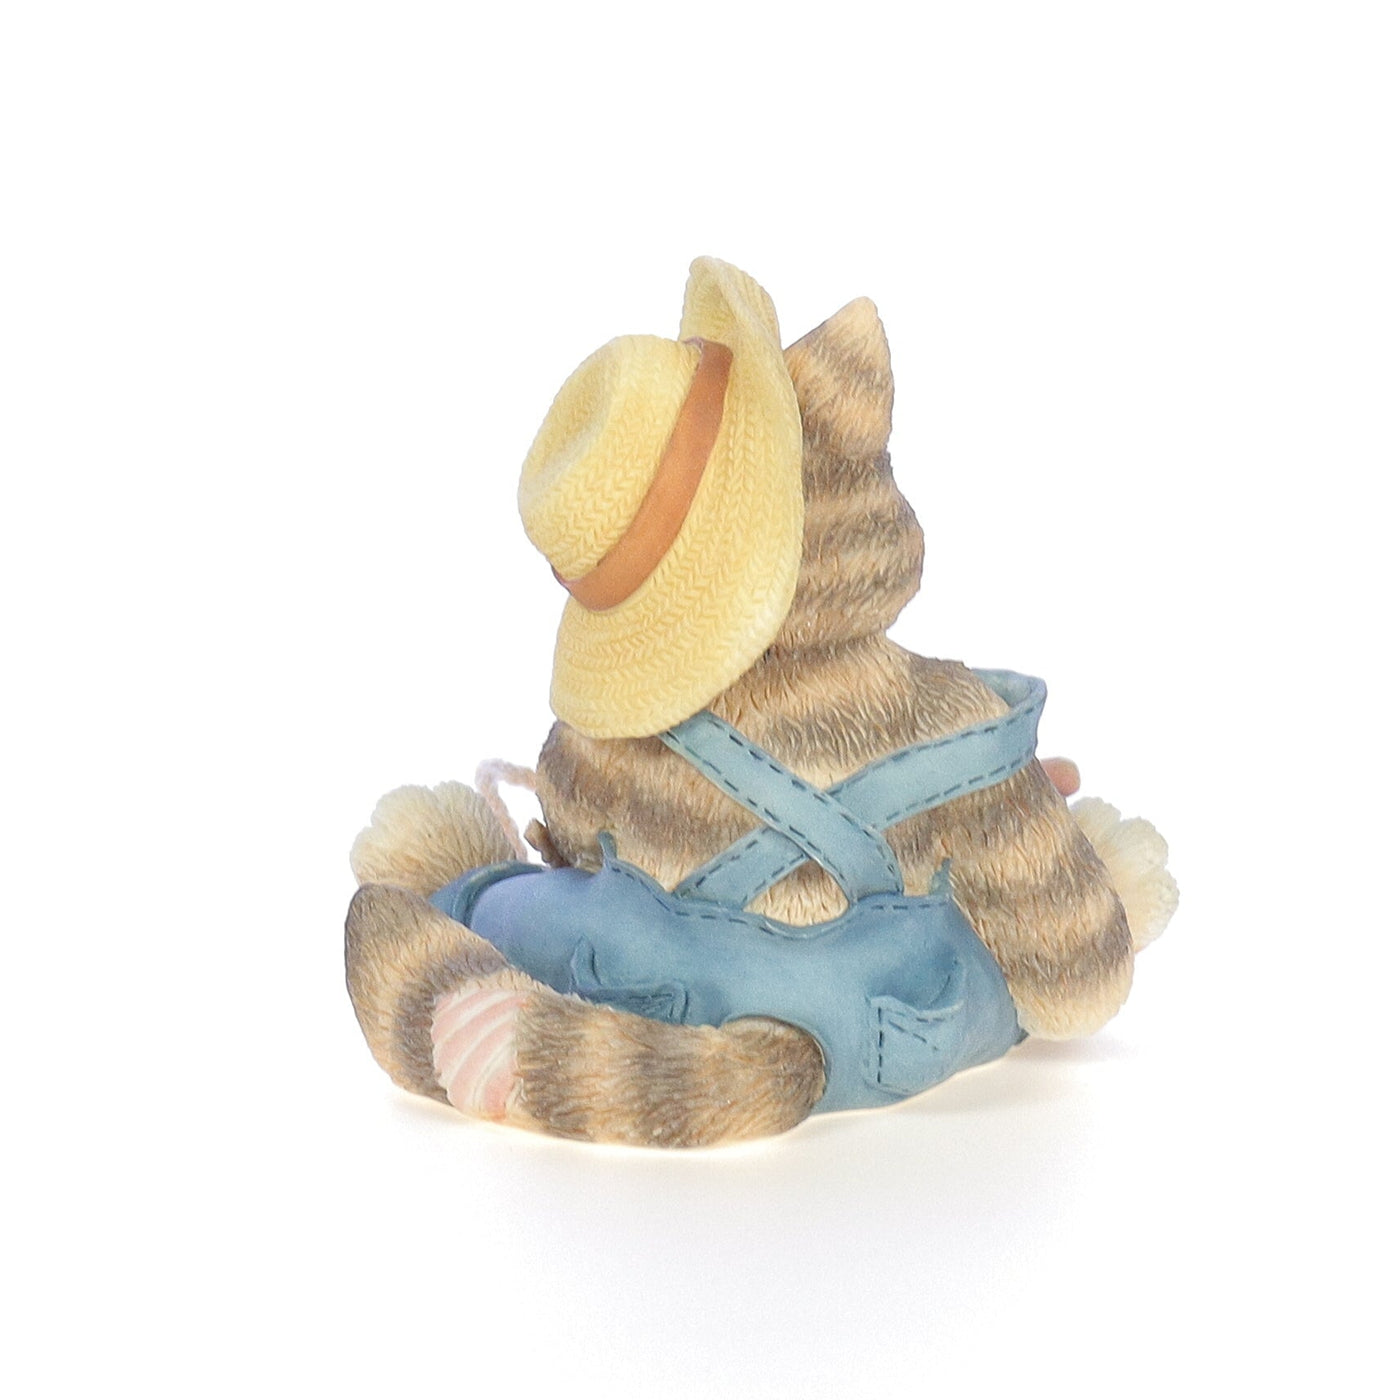 Calico_Kittens_A_Labor_Of_Love_Aggriculture_Figurine_1997